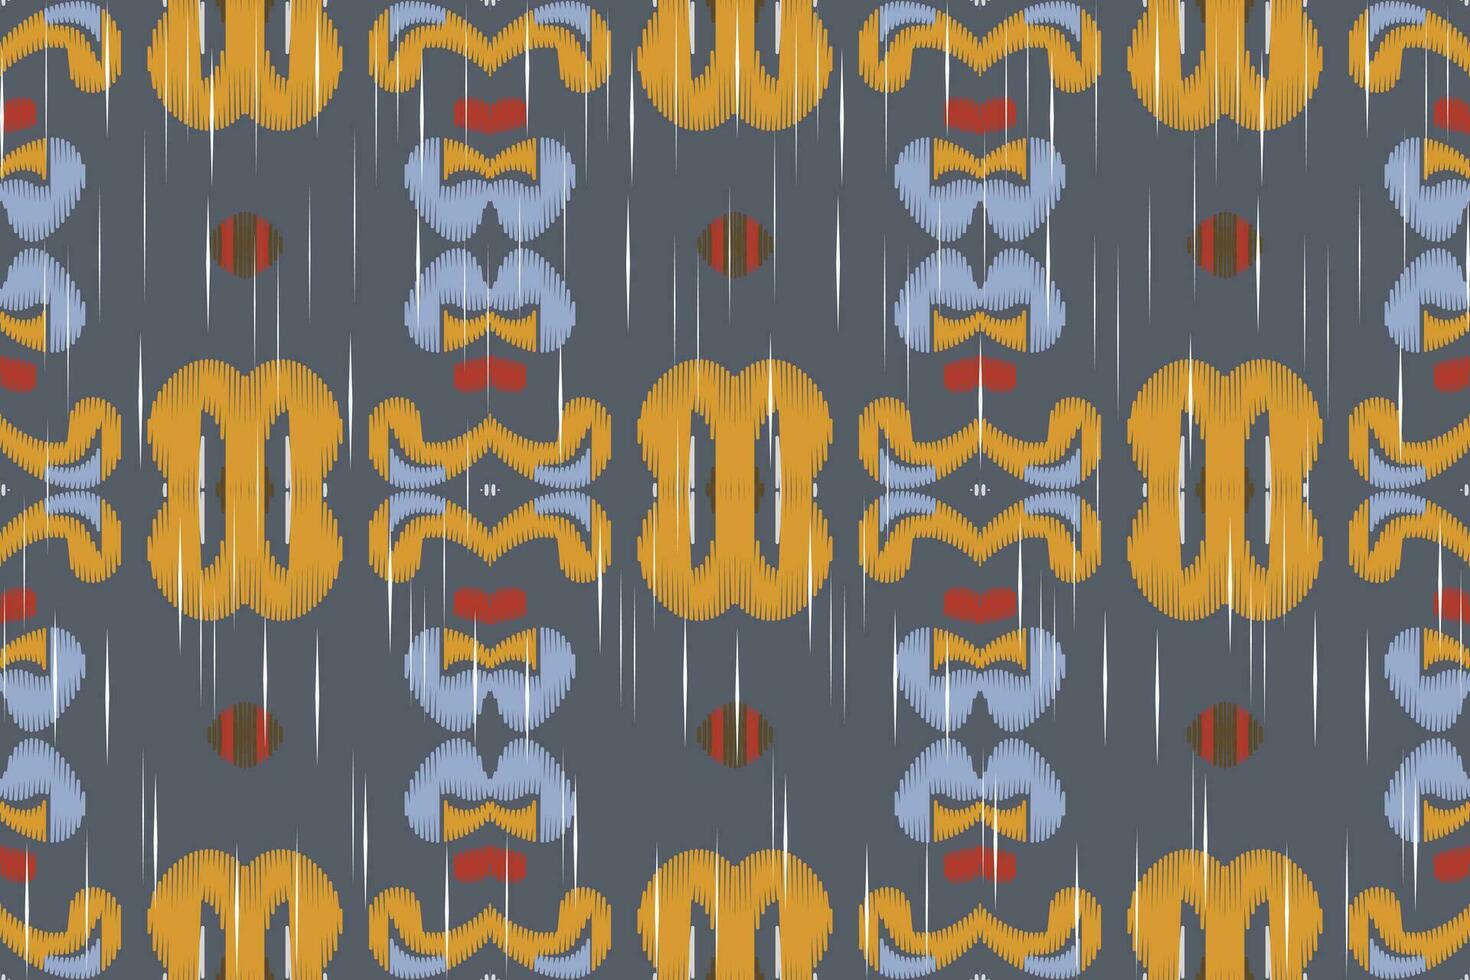 Ikat Fabric Paisley Embroidery Background. Ikat Design Geometric Ethnic Oriental Pattern Traditional. Ikat Aztec Style Abstract Design for Print Texture,fabric,saree,sari,carpet. vector